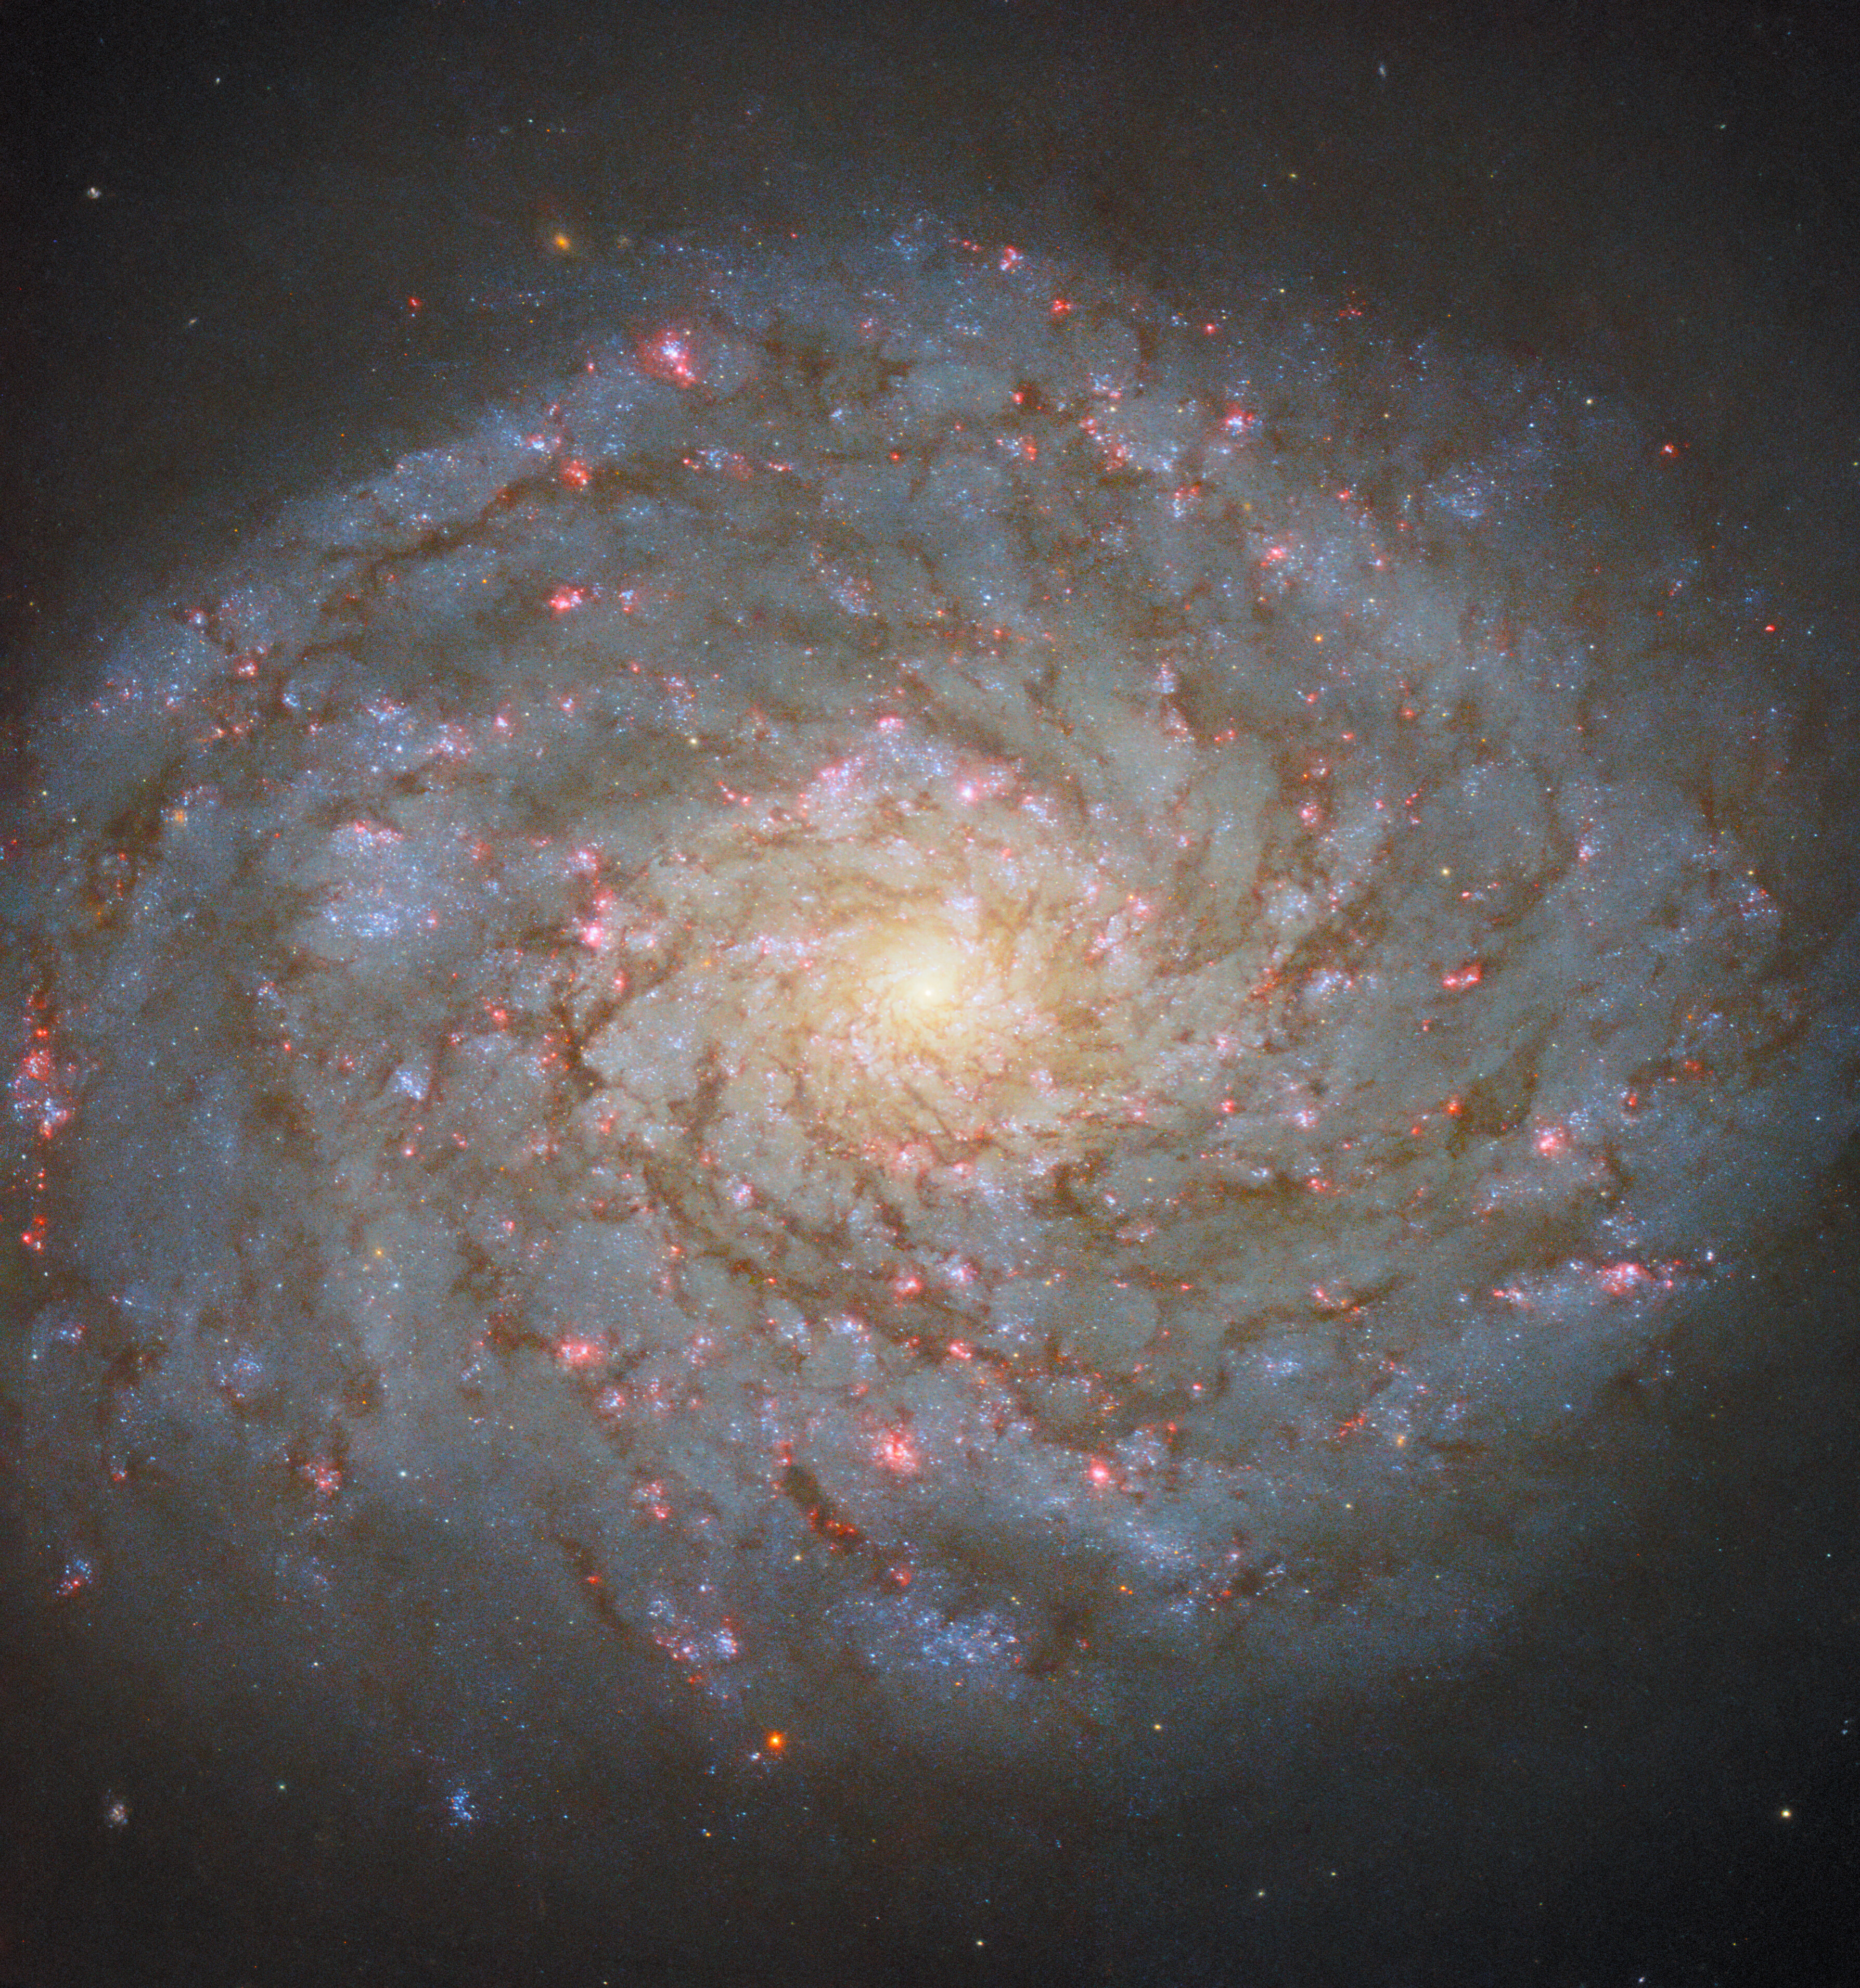 Hubble Captures a Bright Spiral in the Queen’s Hair